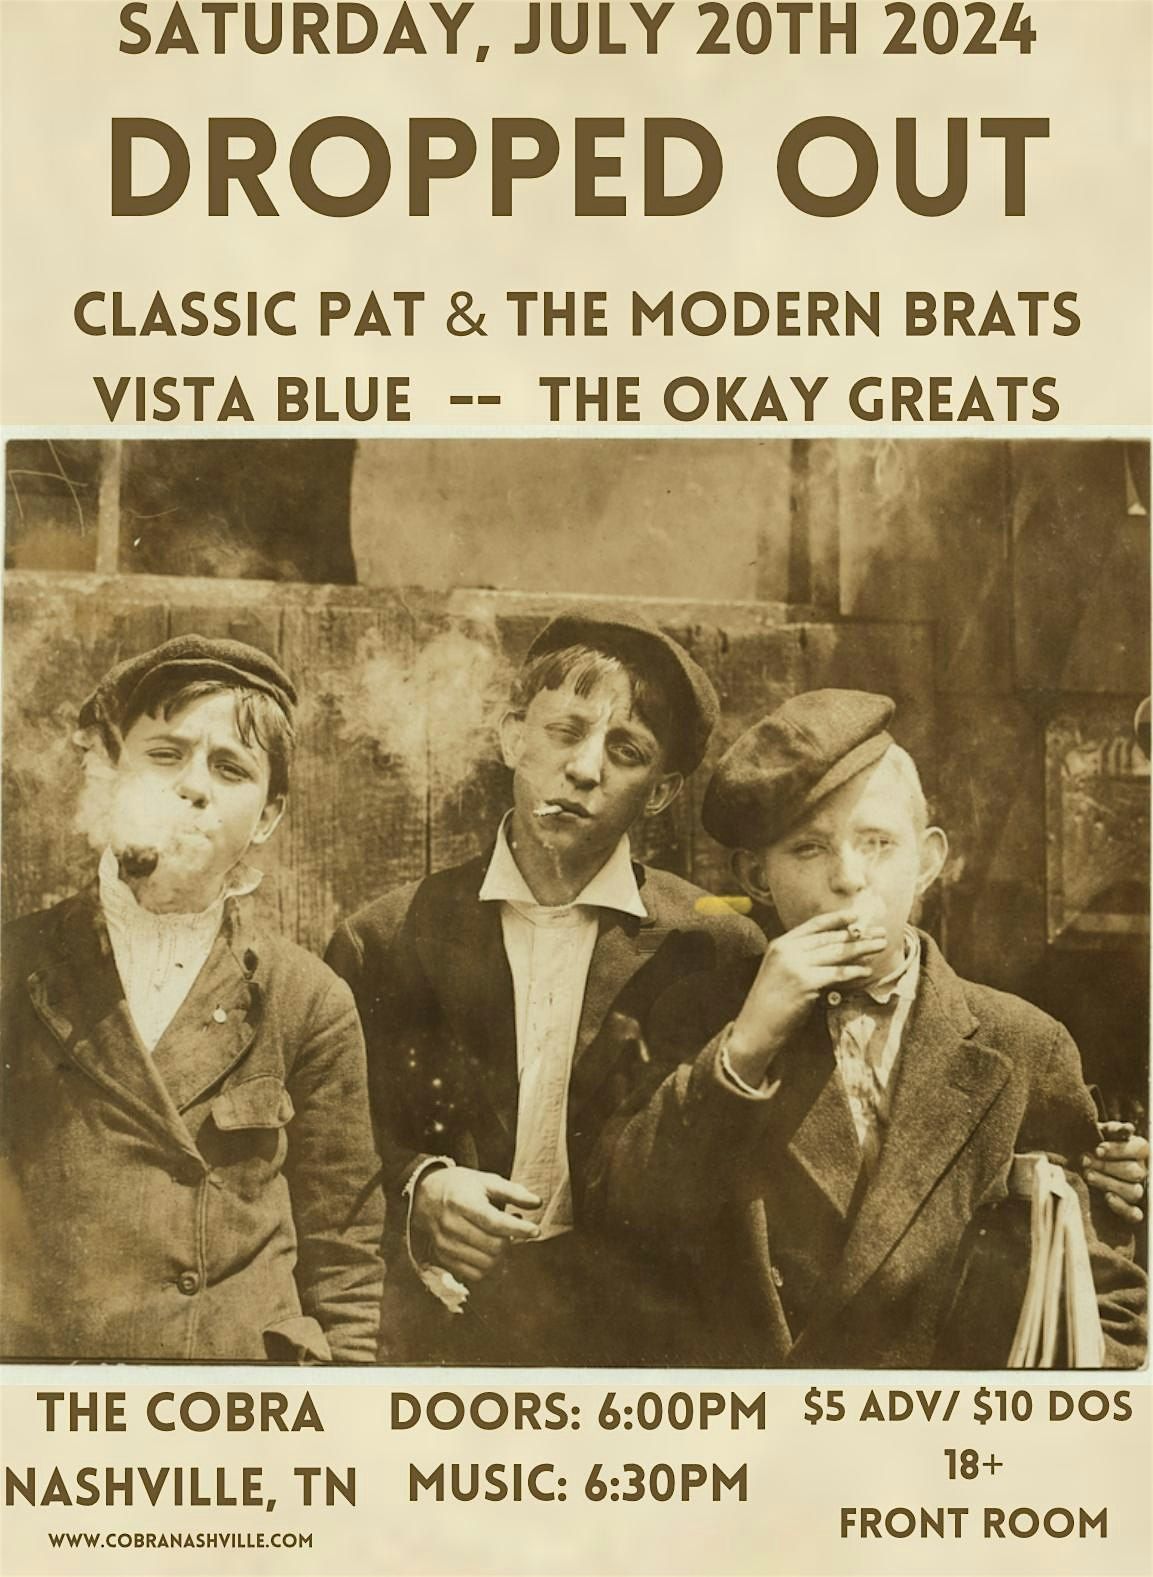 Dropped Out | Classic Pat & the Modern Brats | Vista Blue | The Okay Greats